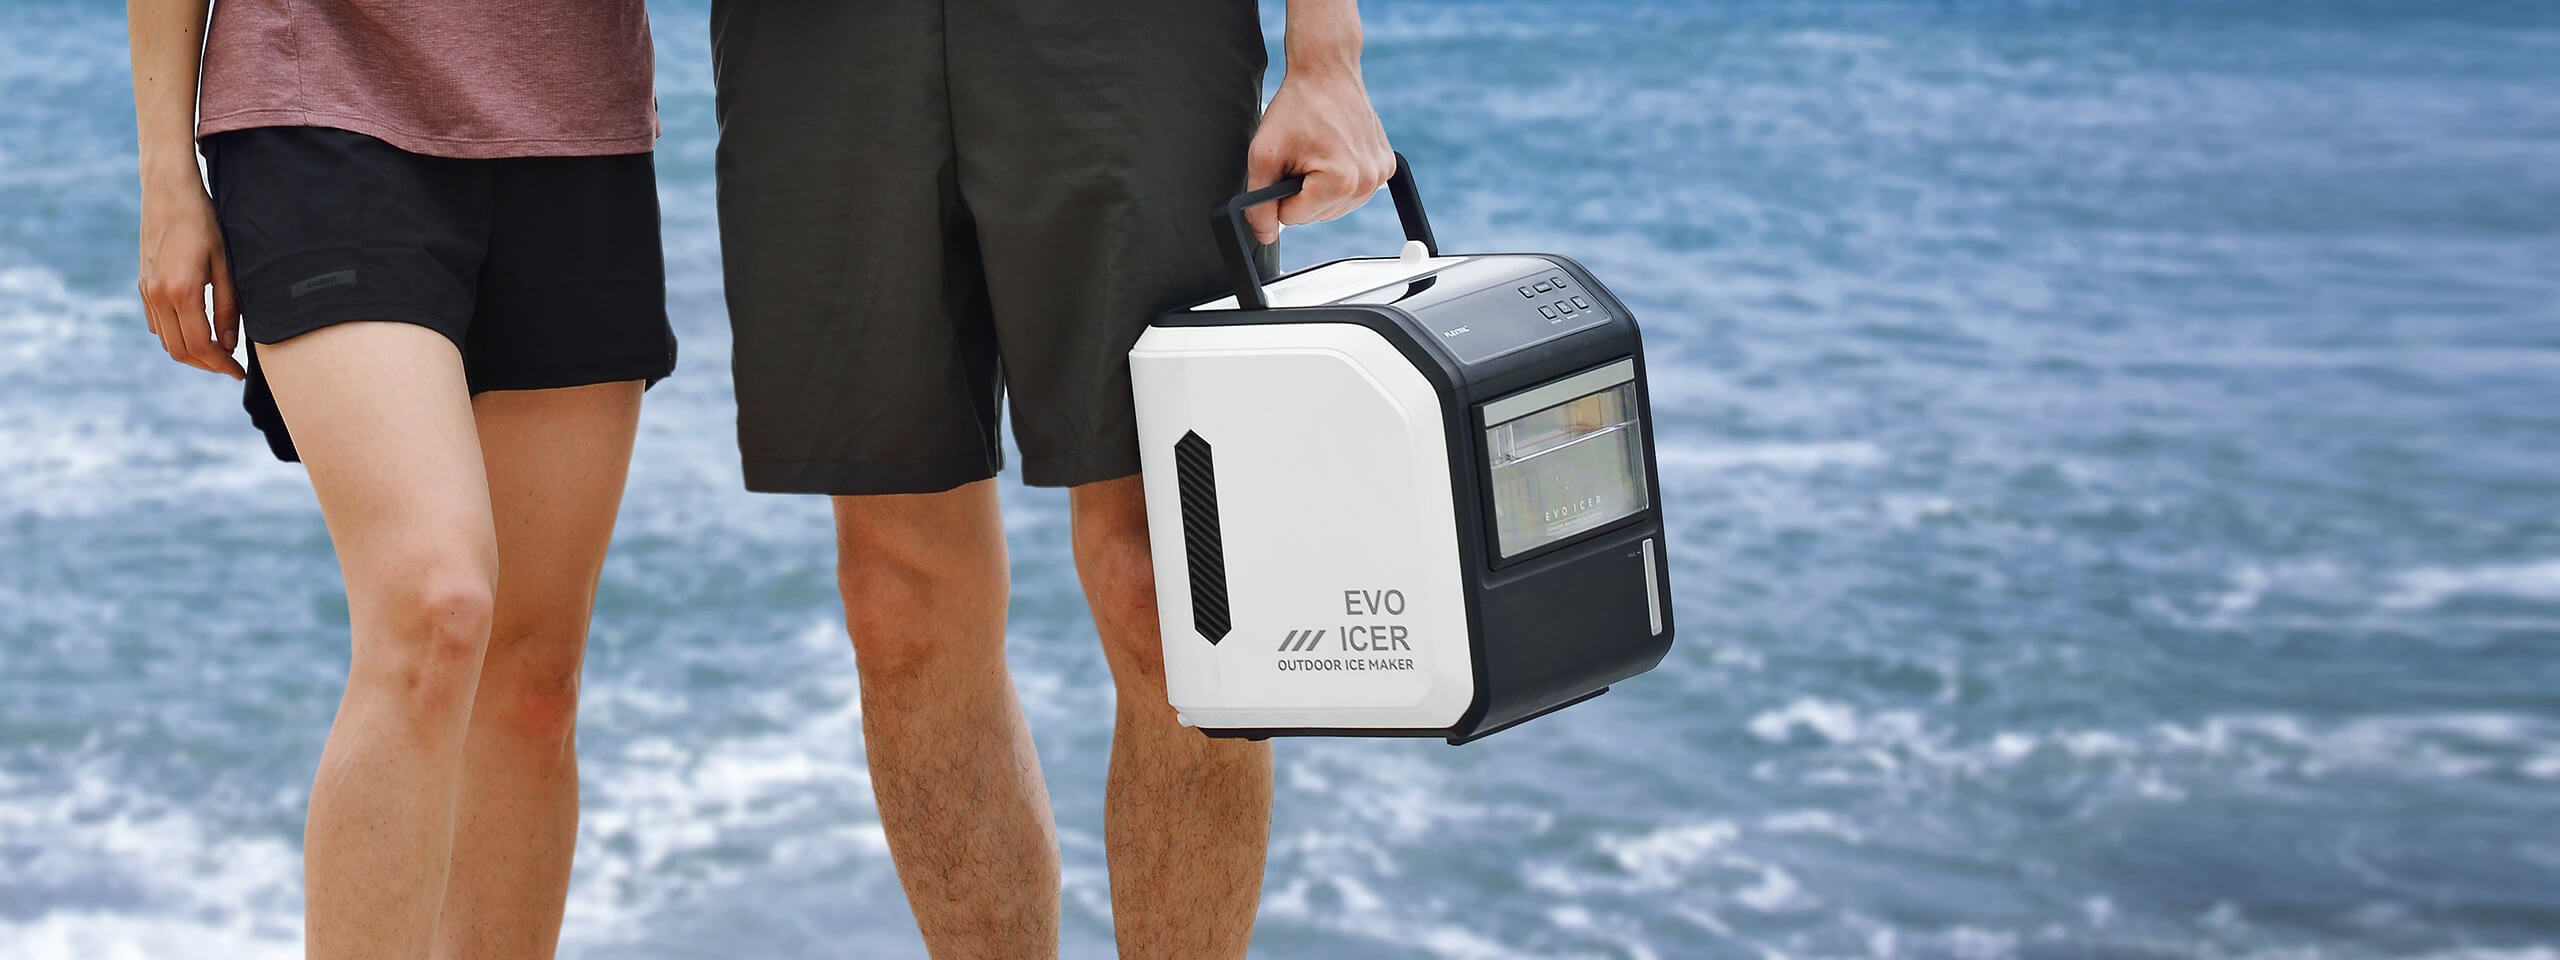 Battery-Powered Ice Maker for Outdoors 39